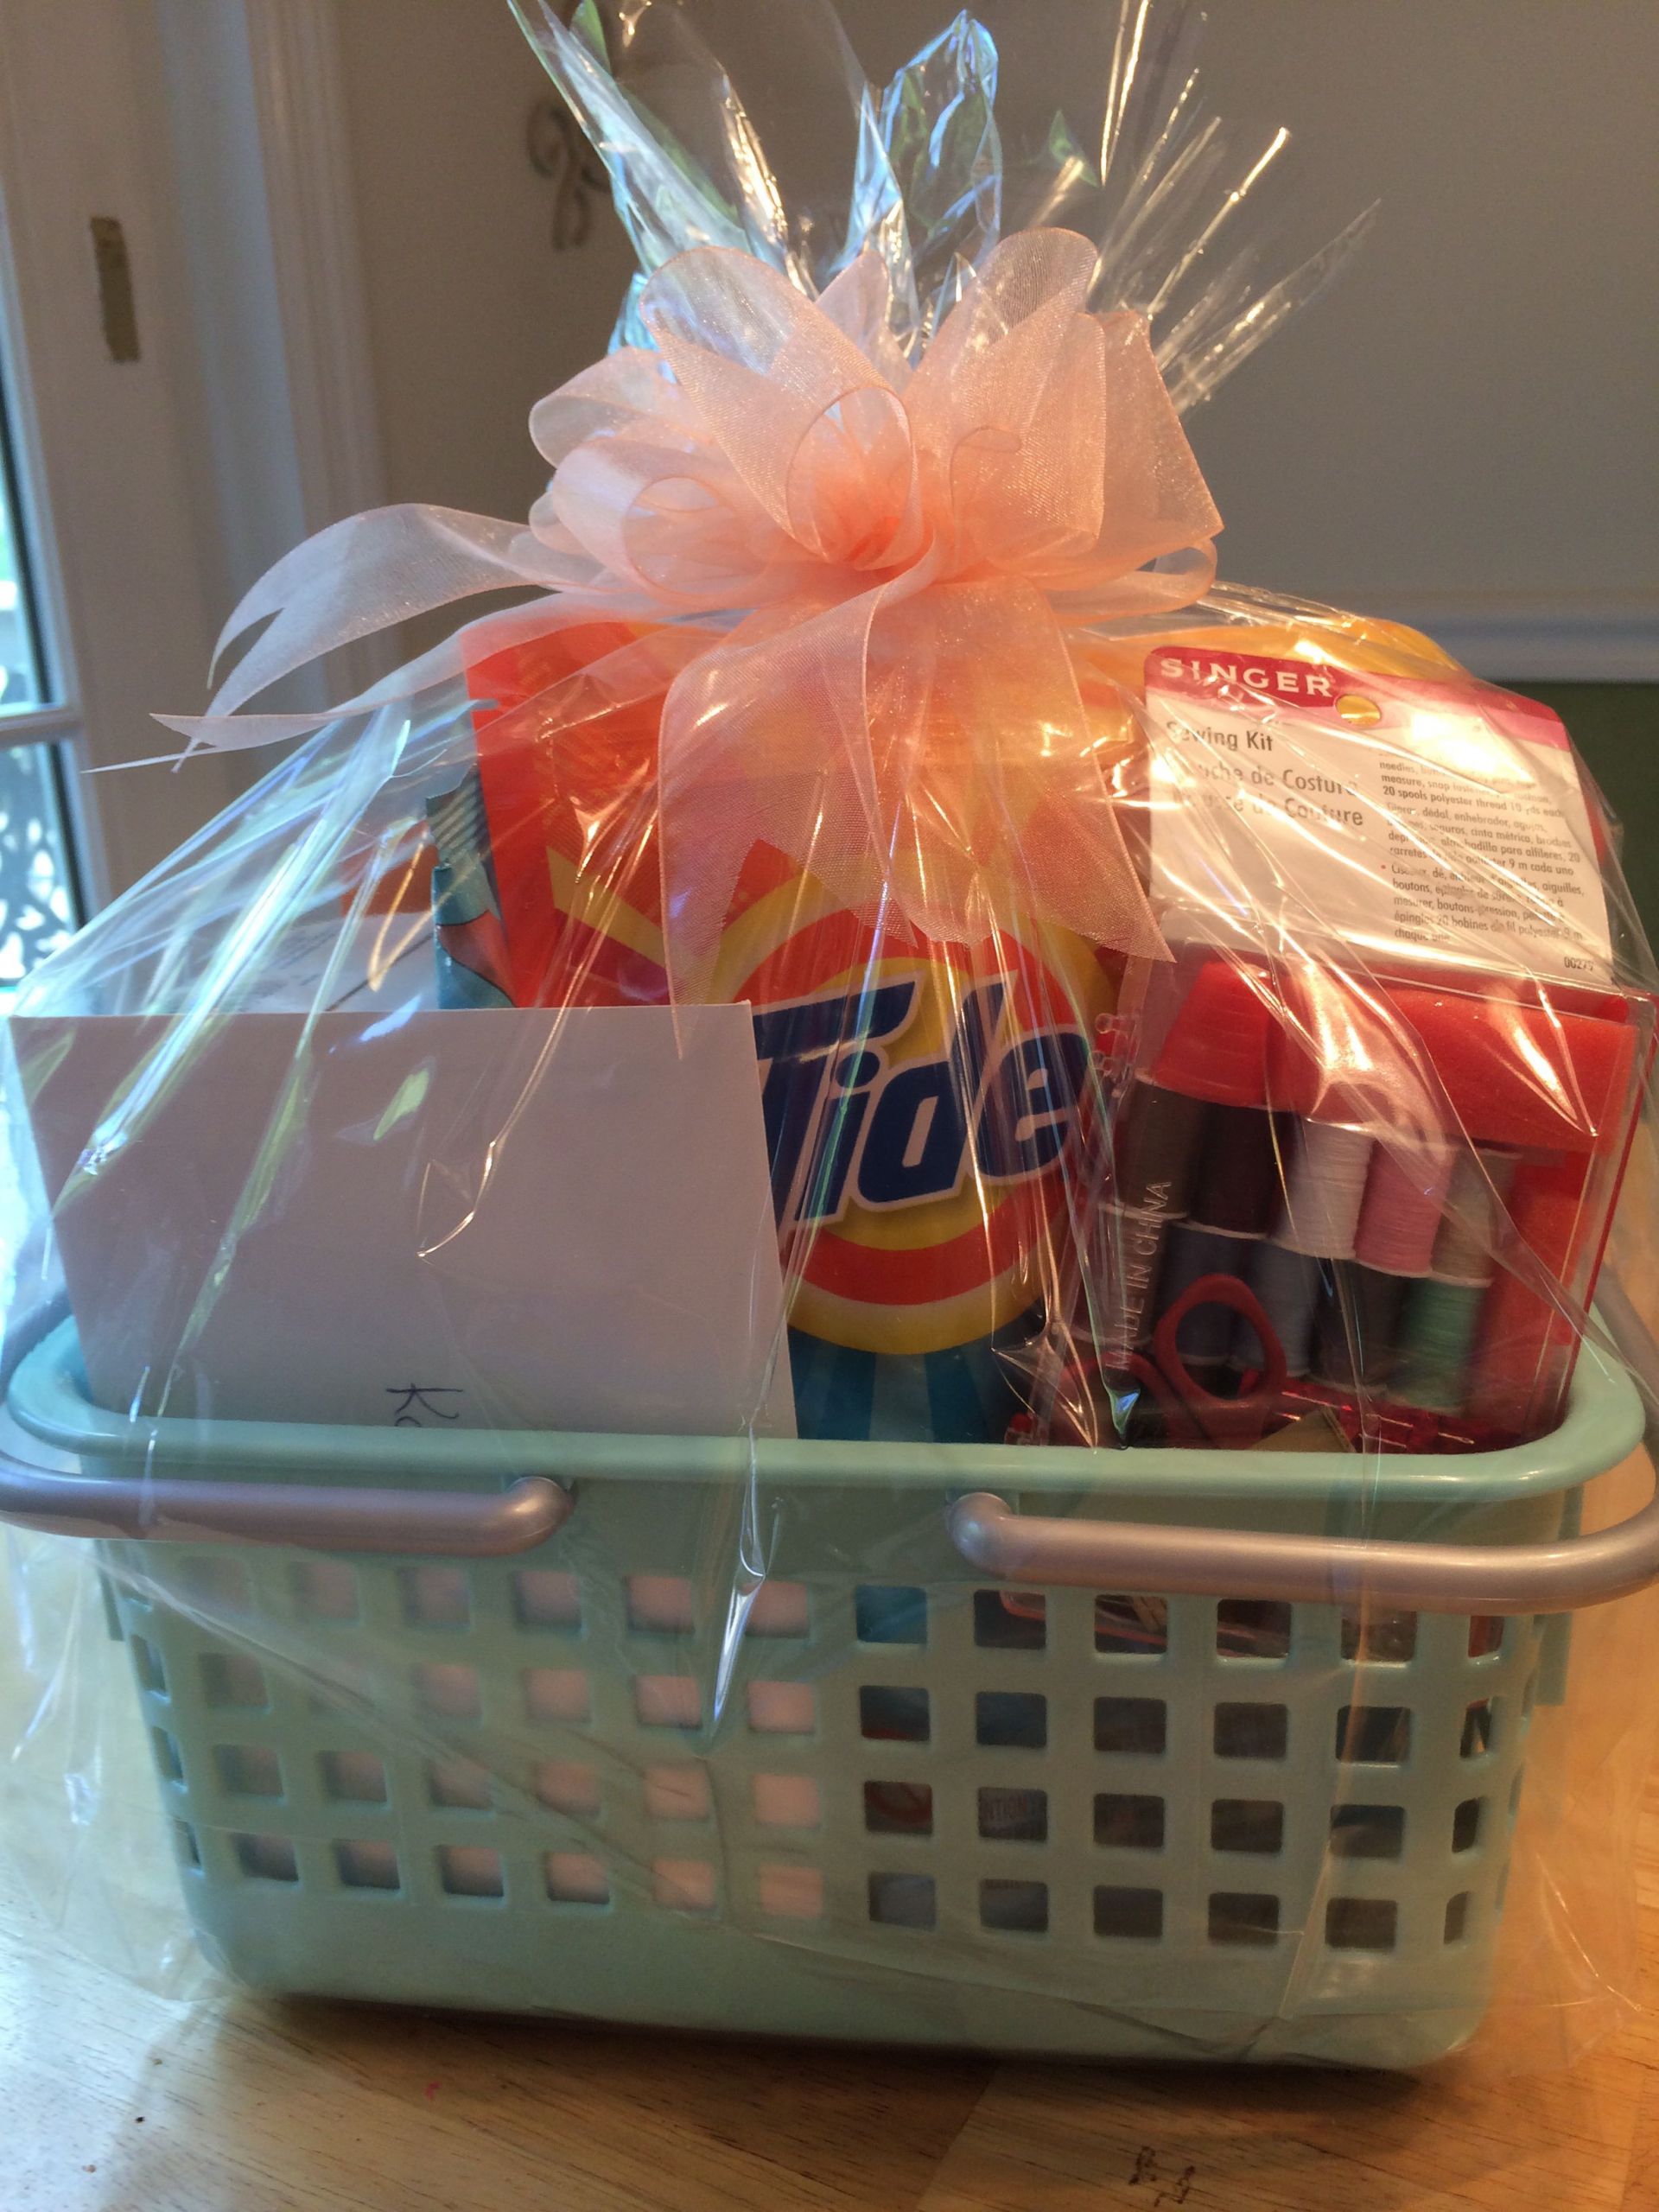 Laundry Basket Gift Ideas
 Going off to college t Just a few items and a cute